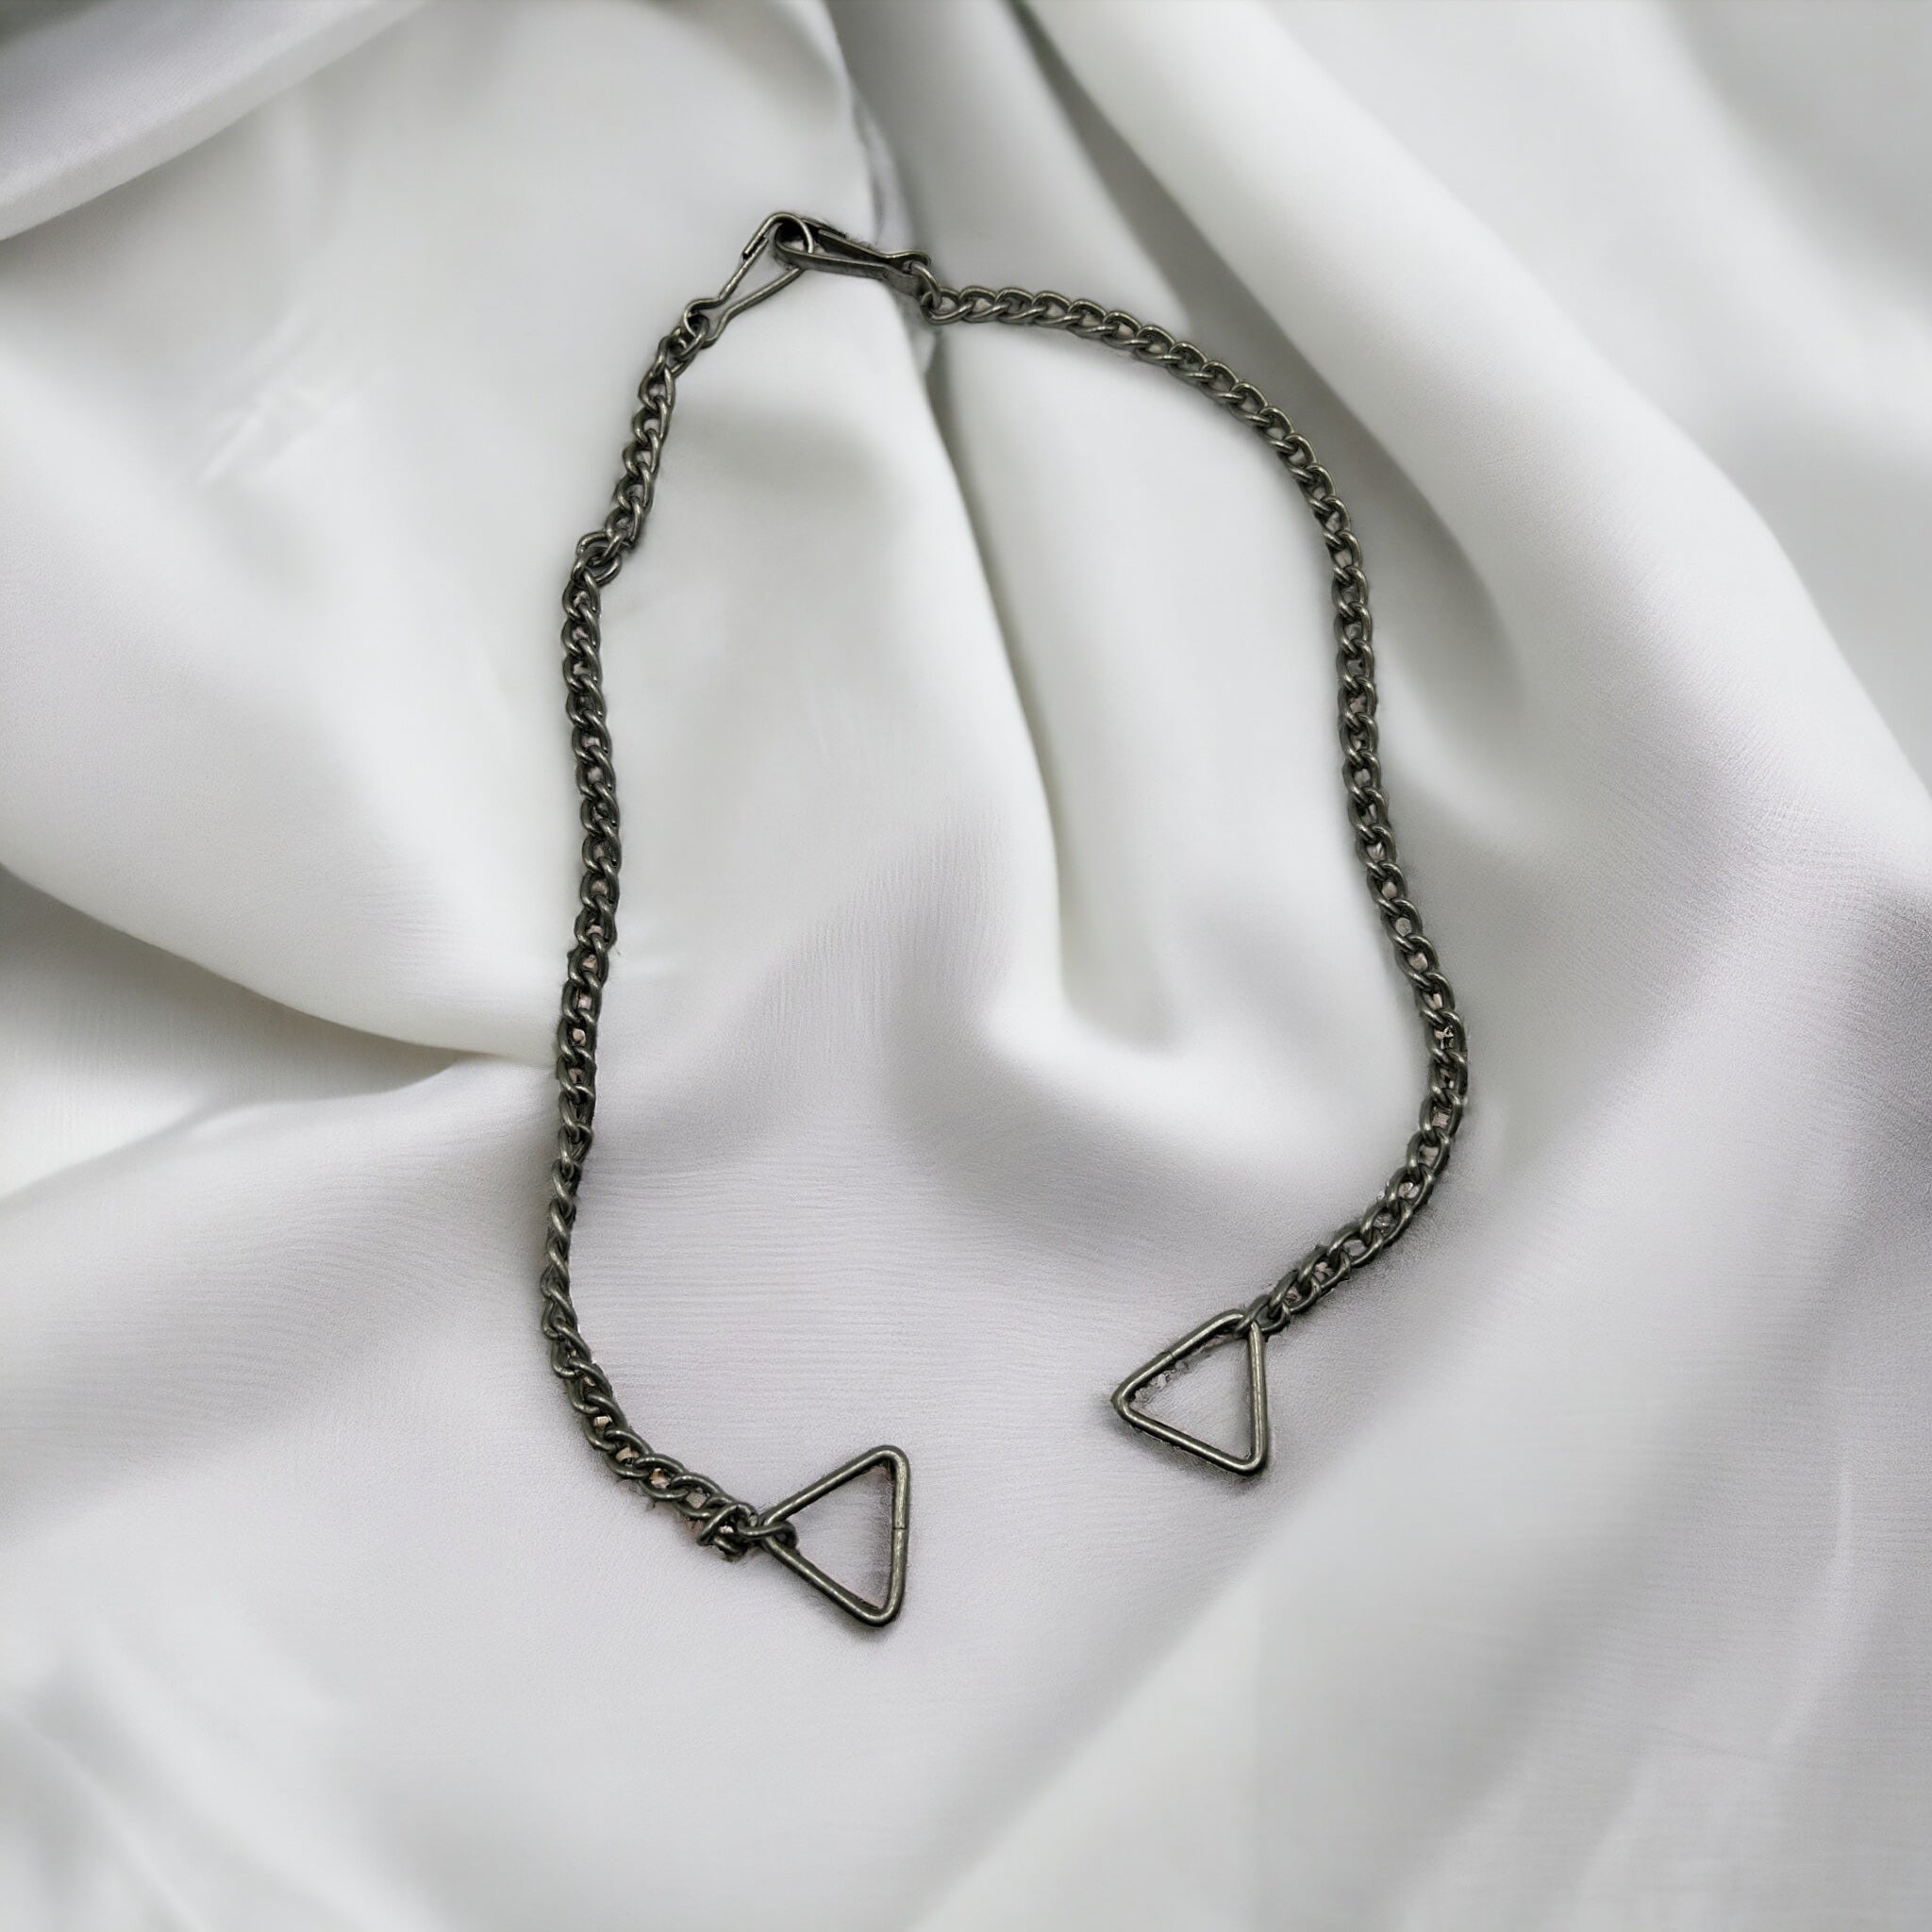 Sporran chain in antique finish  made by Margaret Morrison